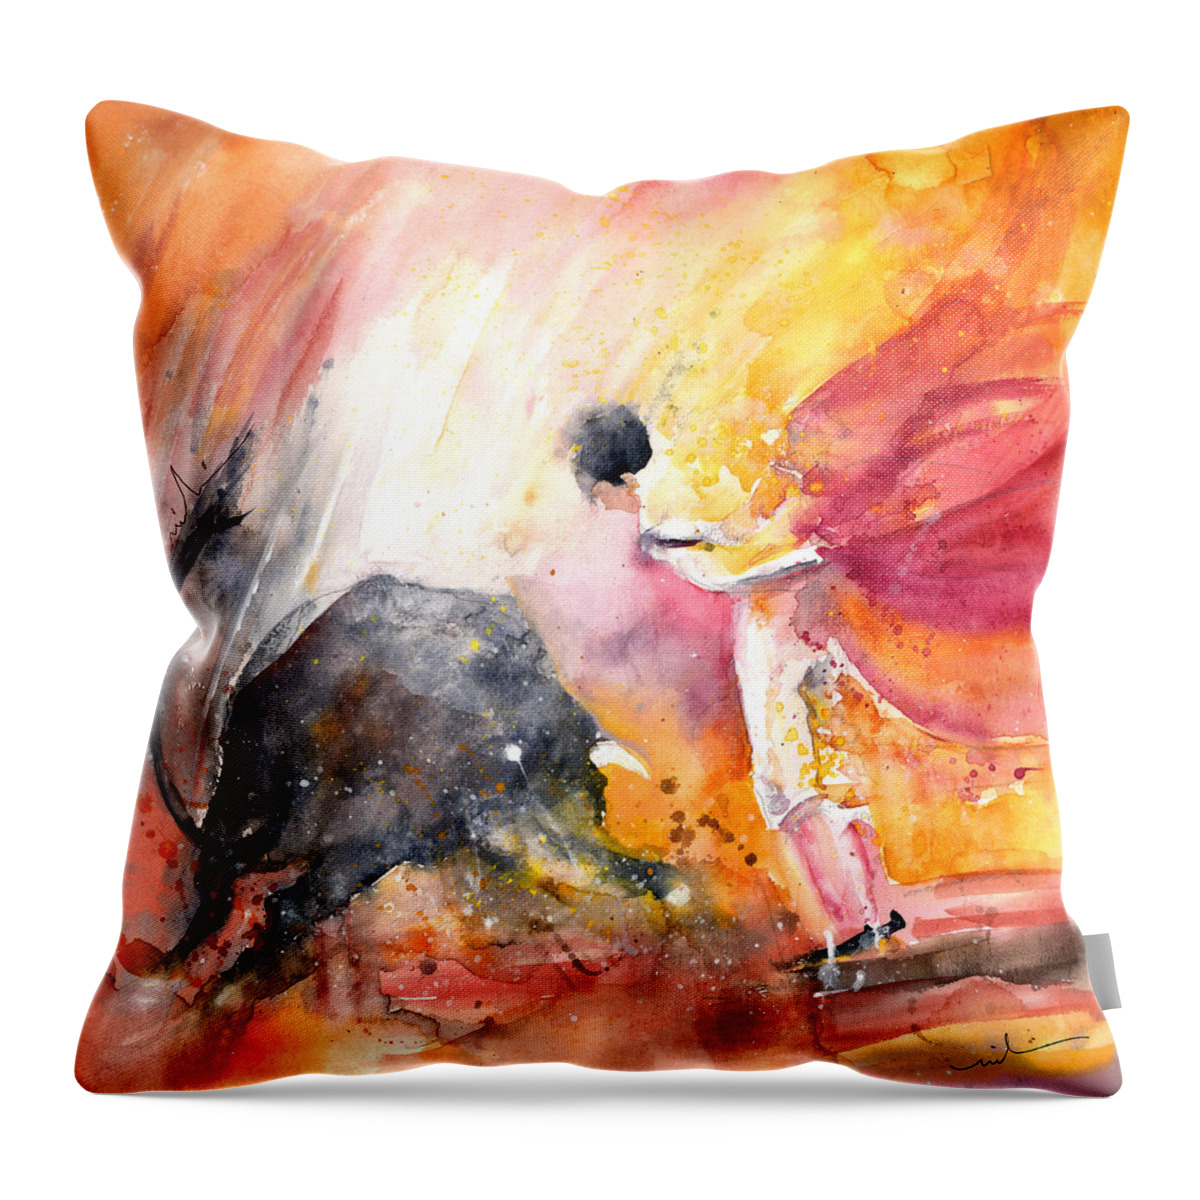 Europe Throw Pillow featuring the painting Angry Little Bull by Miki De Goodaboom